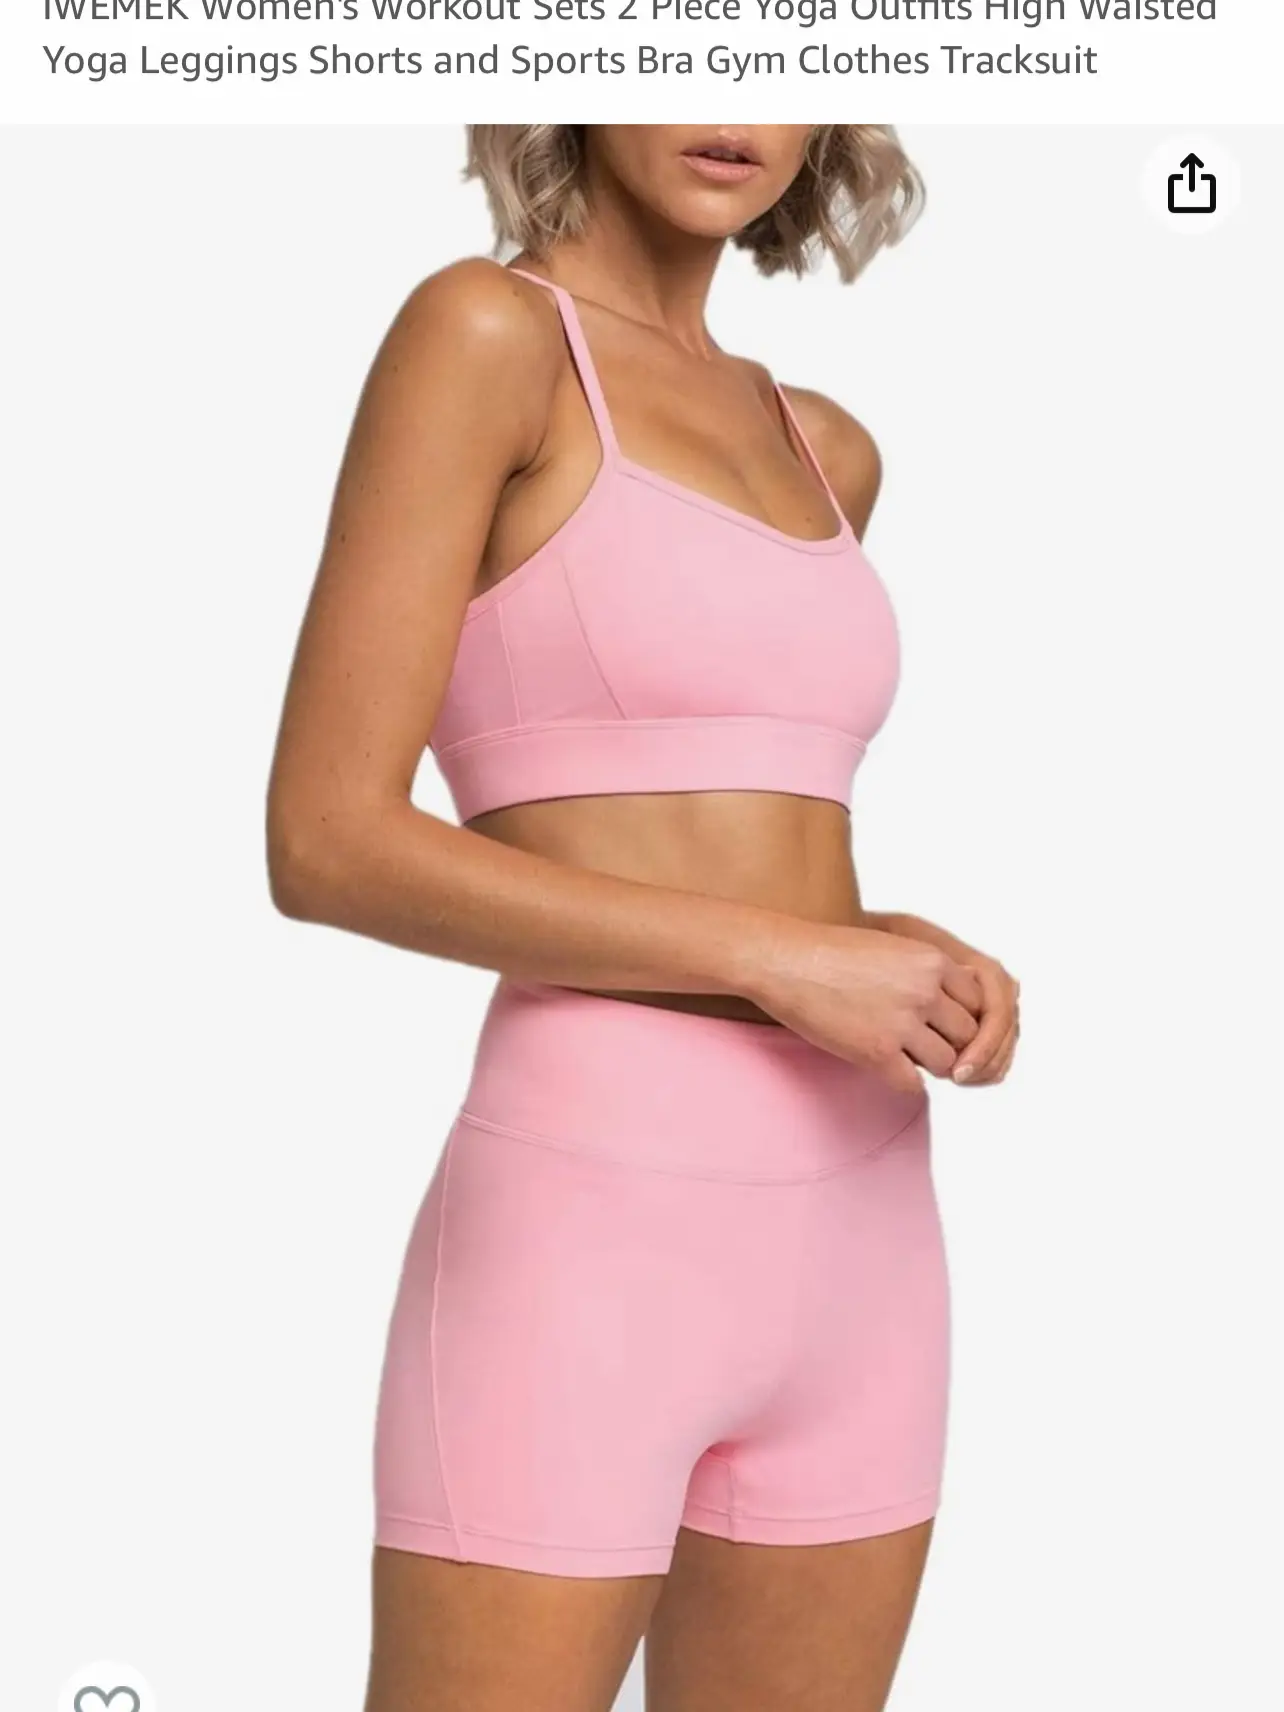  AYWA Casual Workout Sets Two Piece Outfits for Women